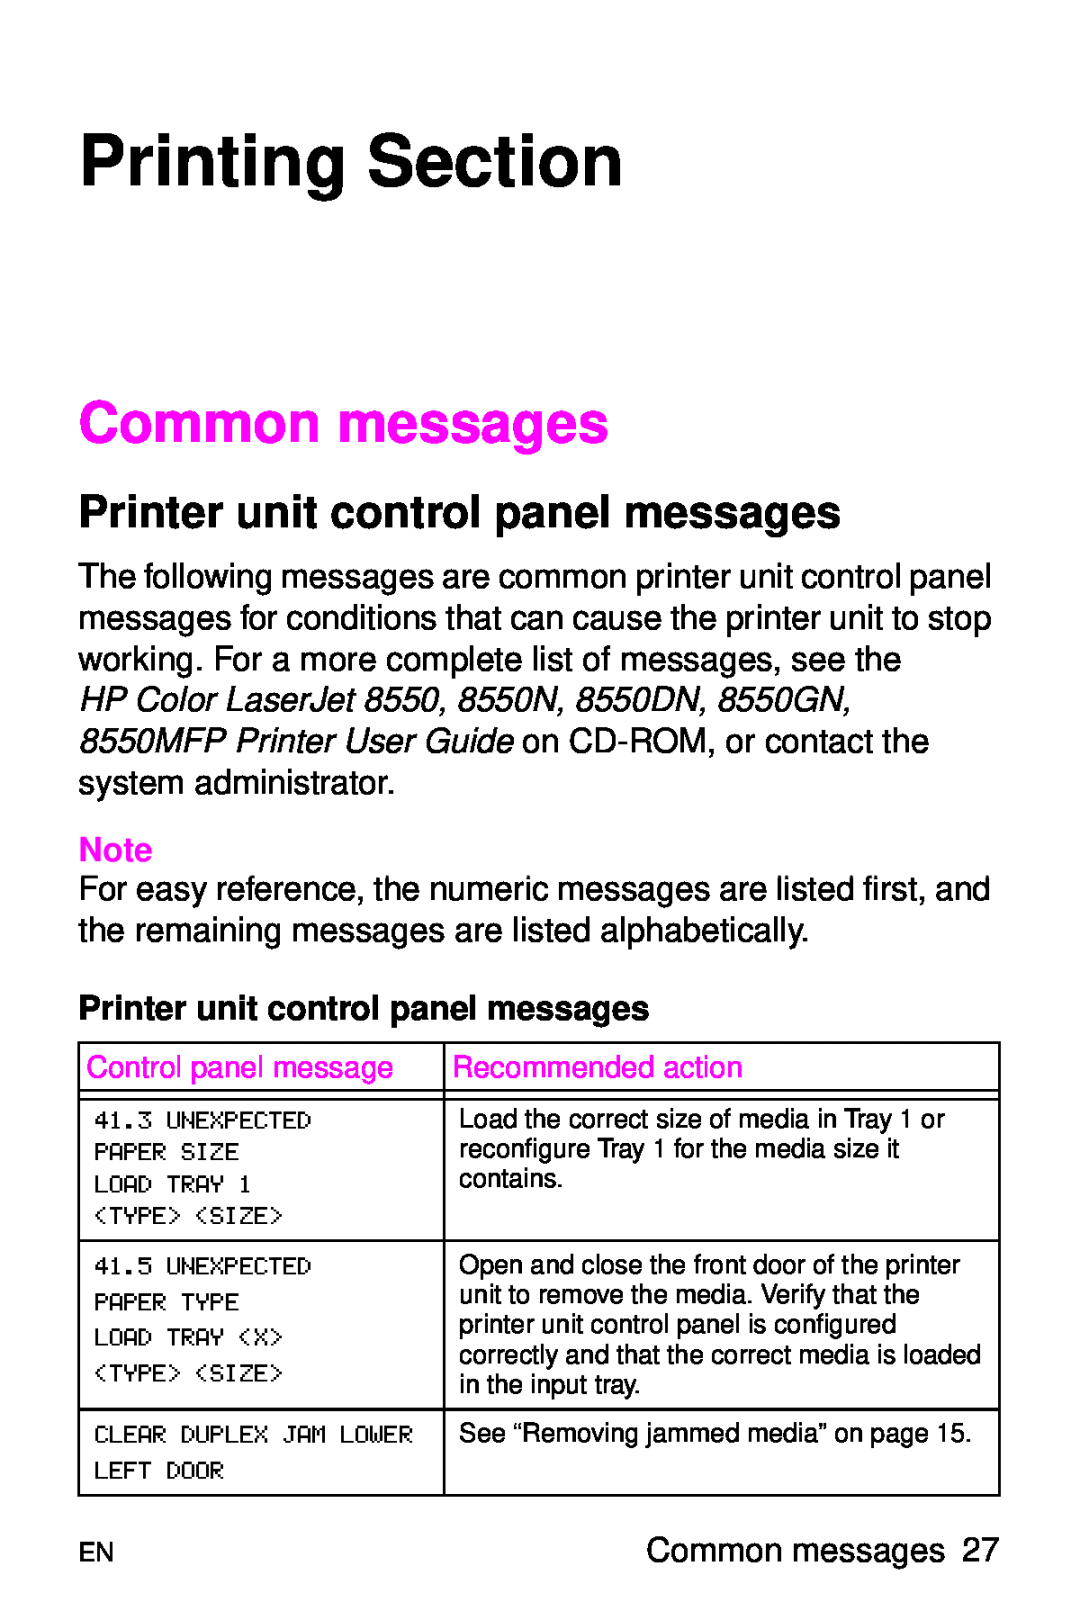 HP 8000 s manual Printing Section, Common messages, Printer unit control panel messages, Control panel message 